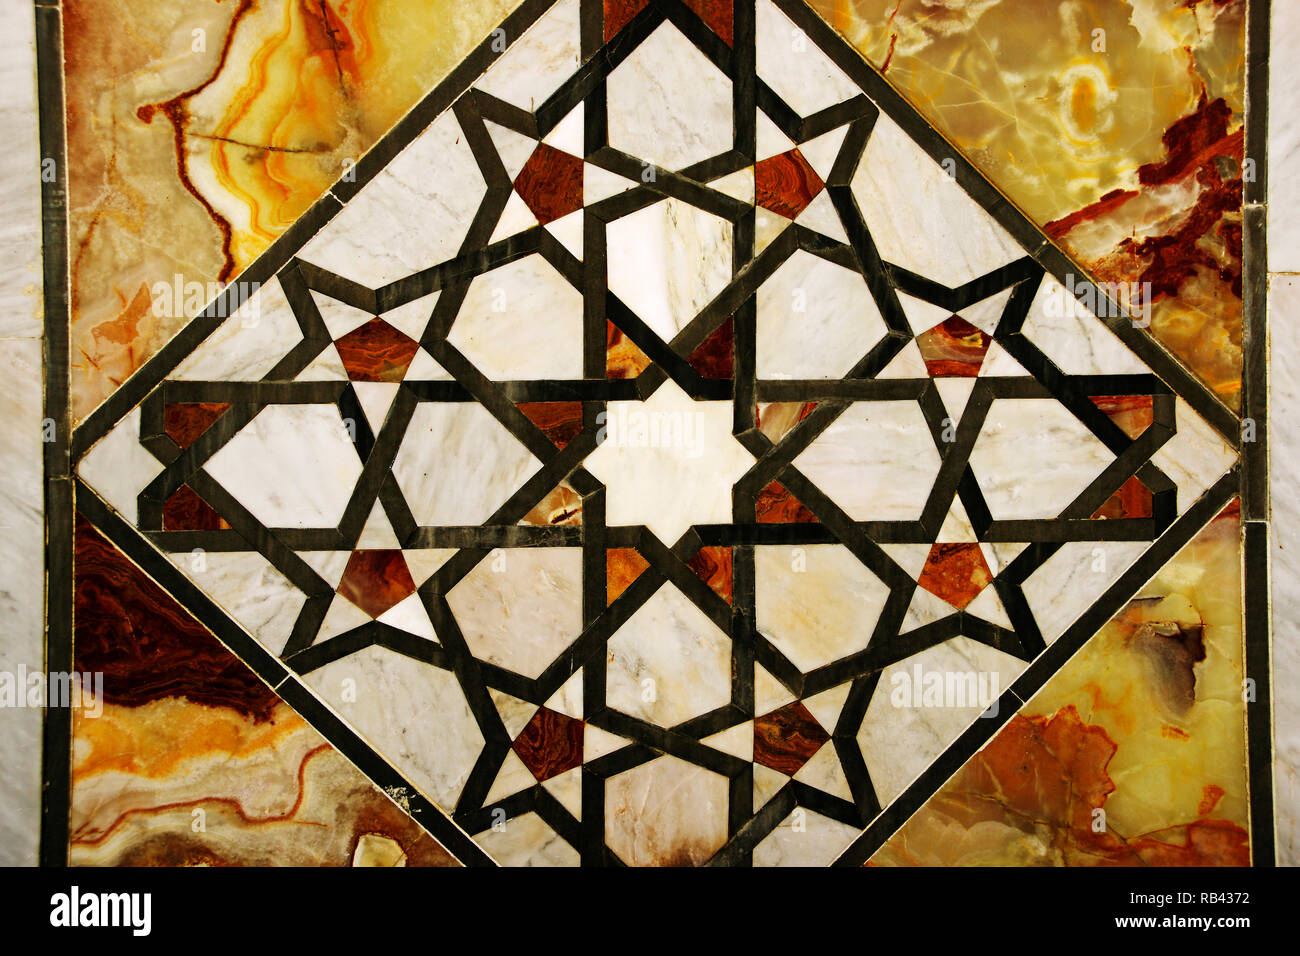 Marble decoration, Ummayad Mosque, also known as the Grand Mosque of Damascus. Syria, Middle East Stock Photo